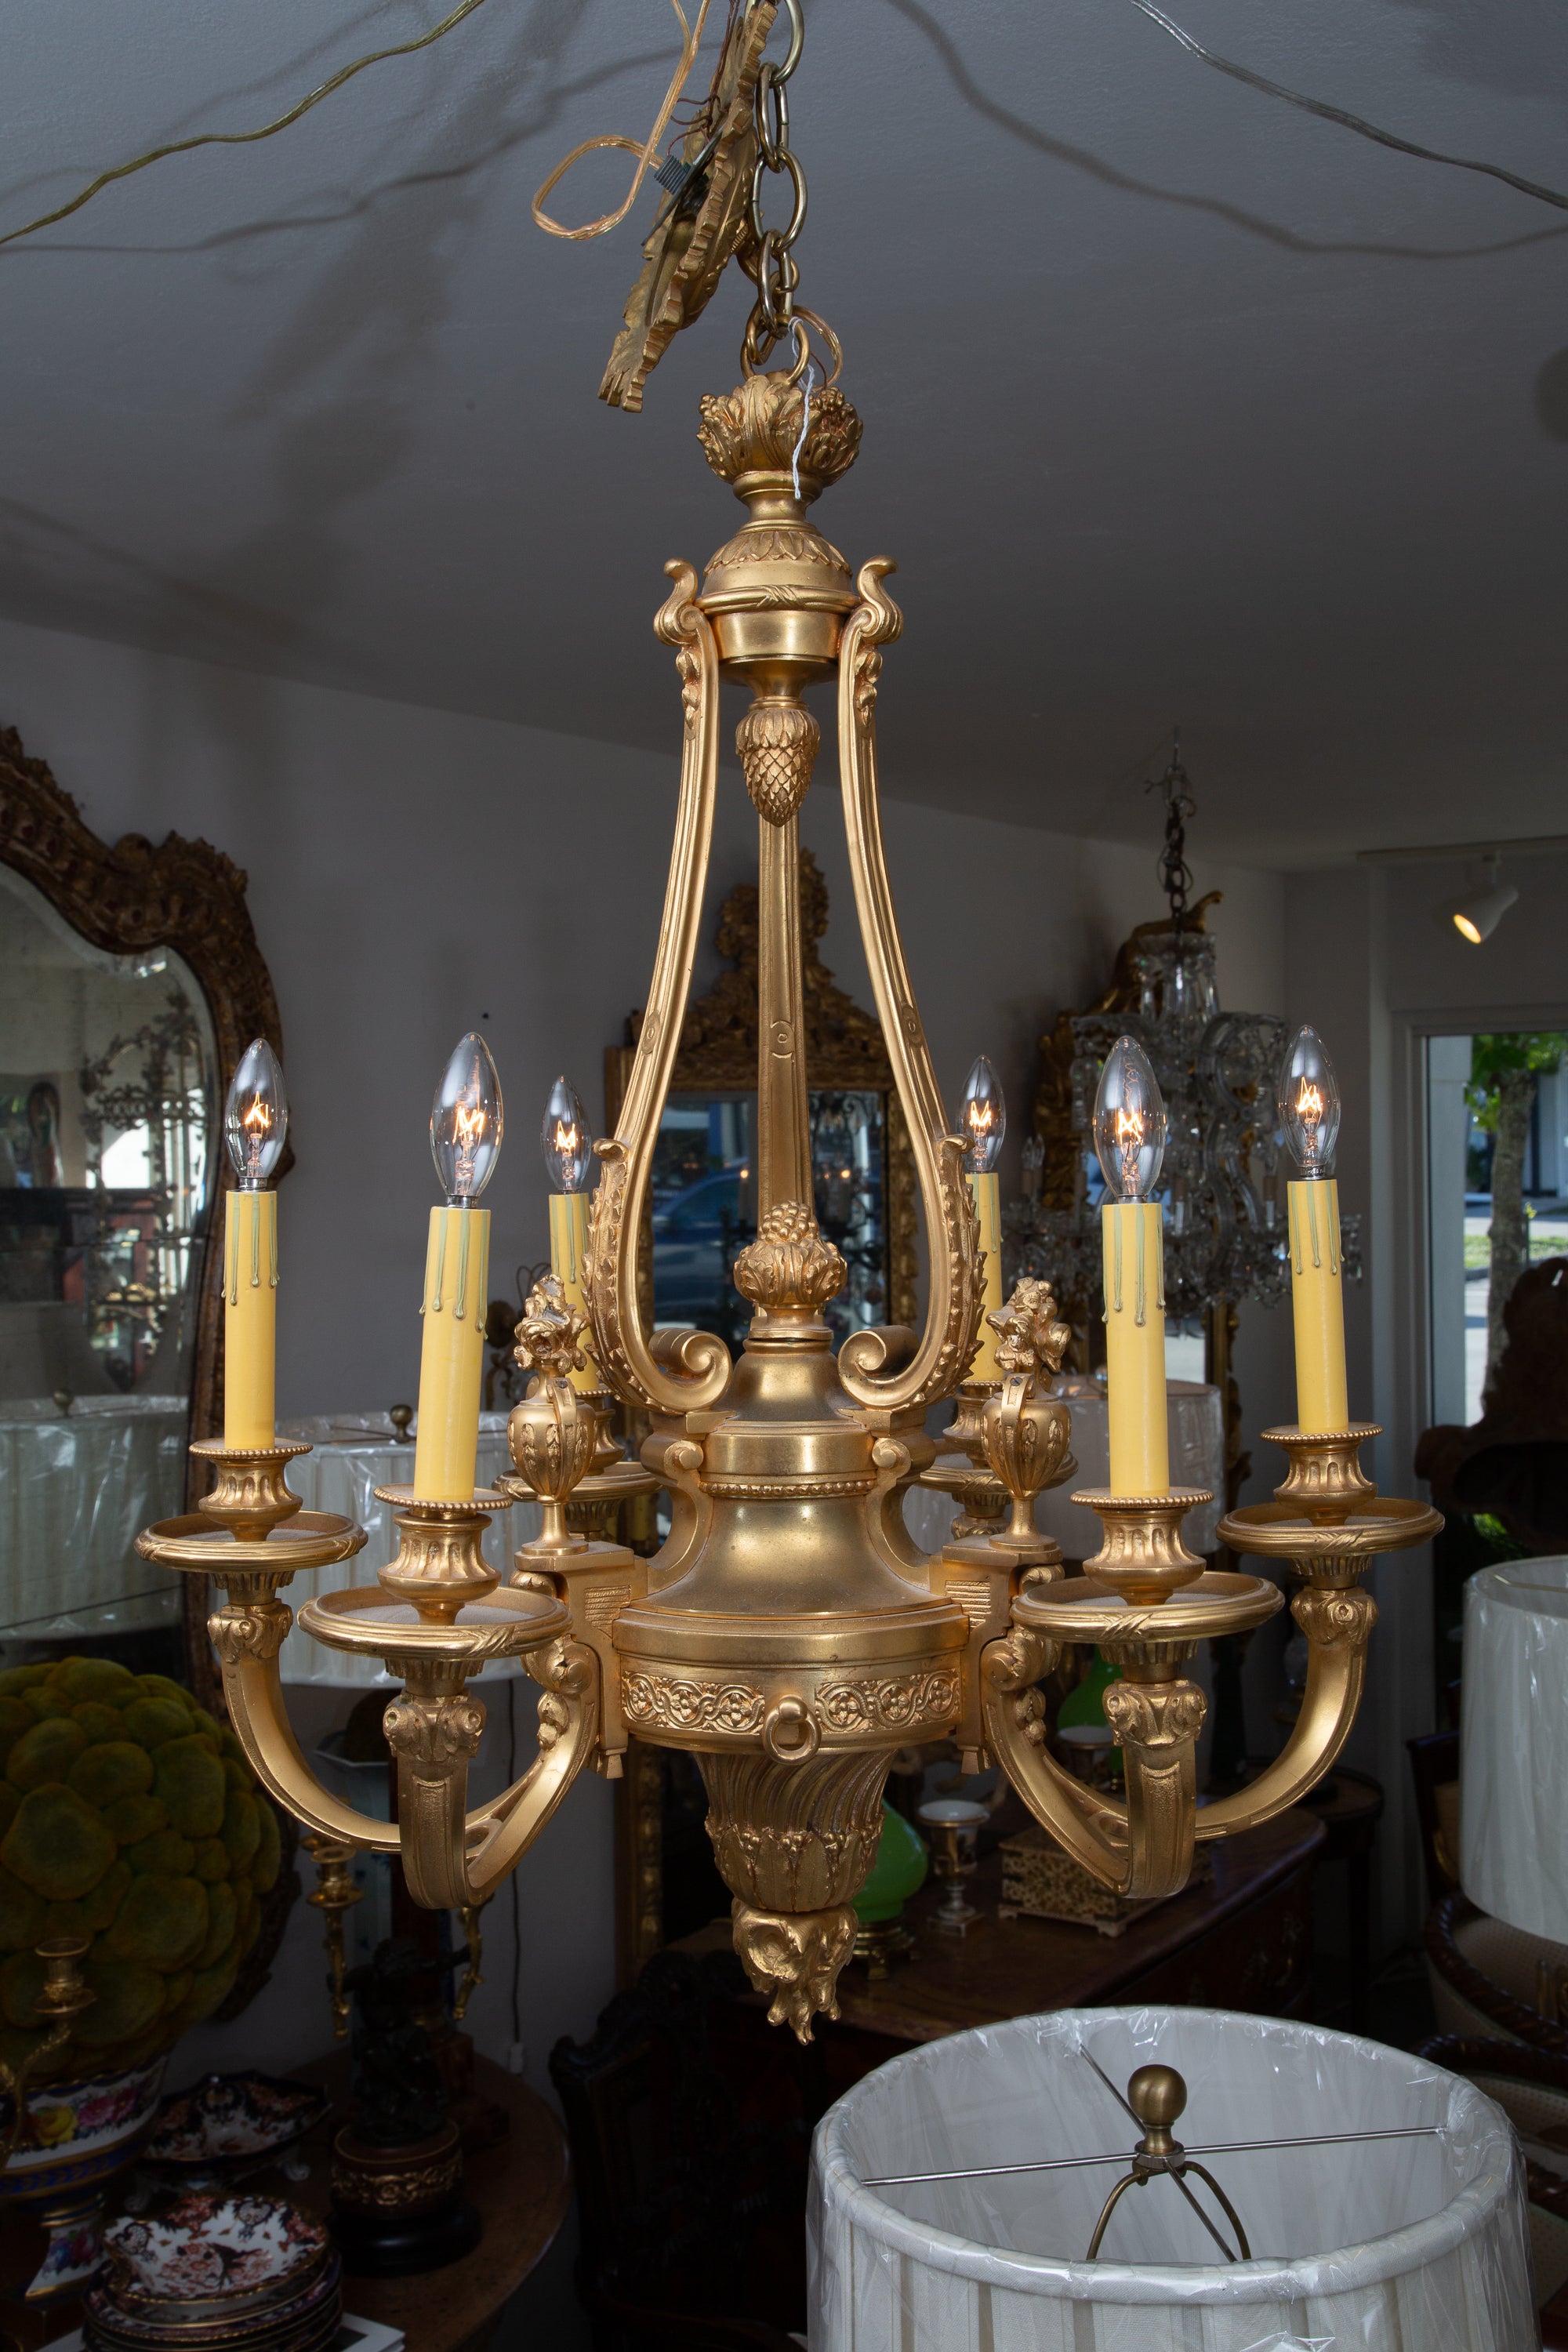 This is a graceful six light glit bronze French hanging chandelier. Simple, yet sophisticated.